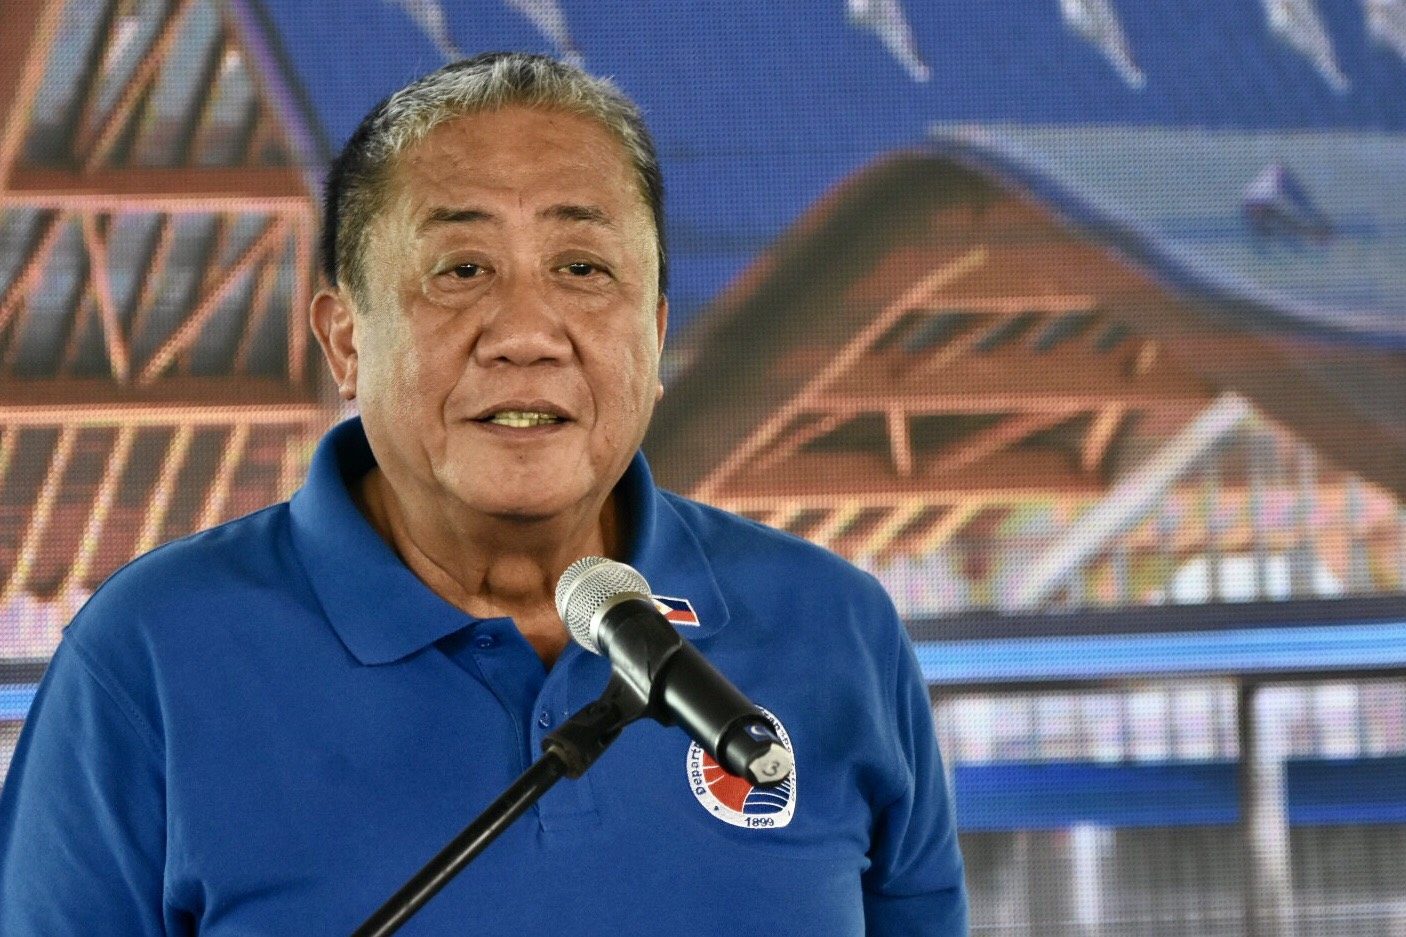 Tugade on MRT3 losses in 2018: ‘Don’t judge DOTr on isolated cases’